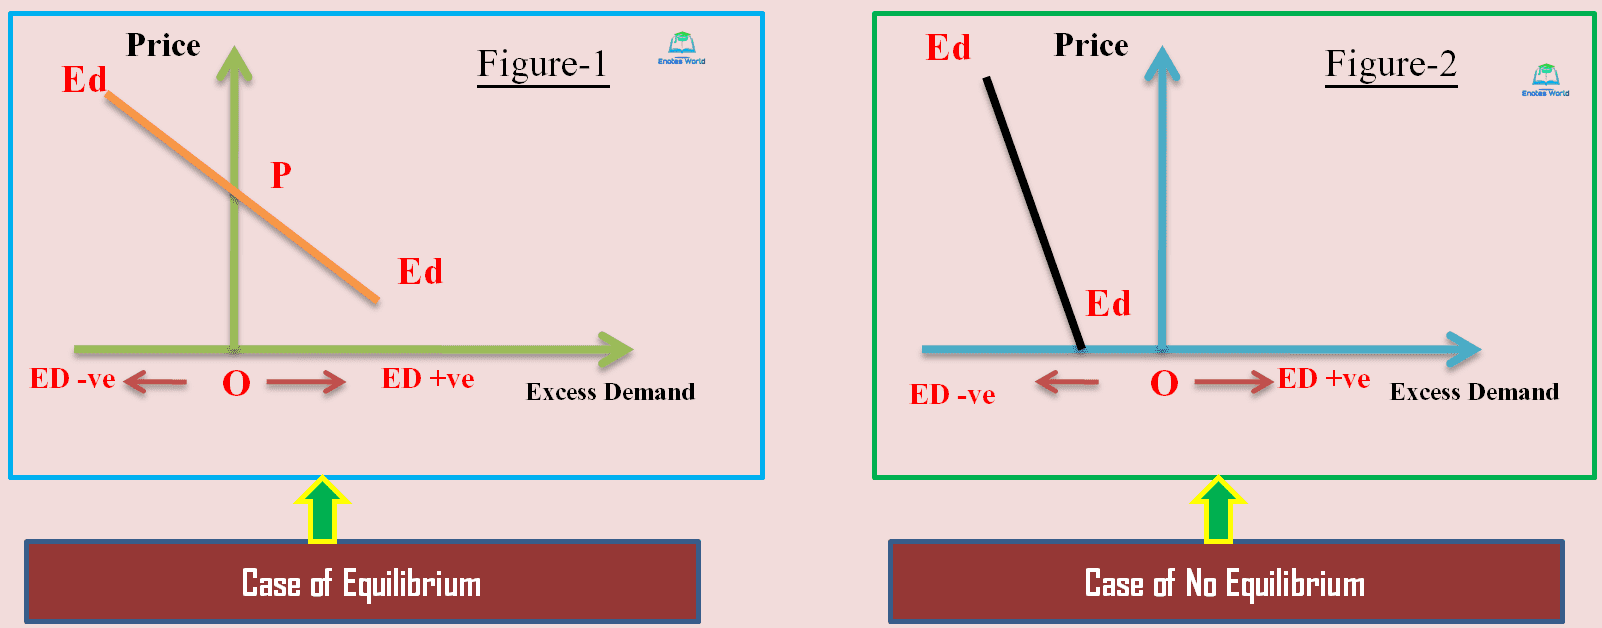 Excess demand function approach to existence of an equilibrium